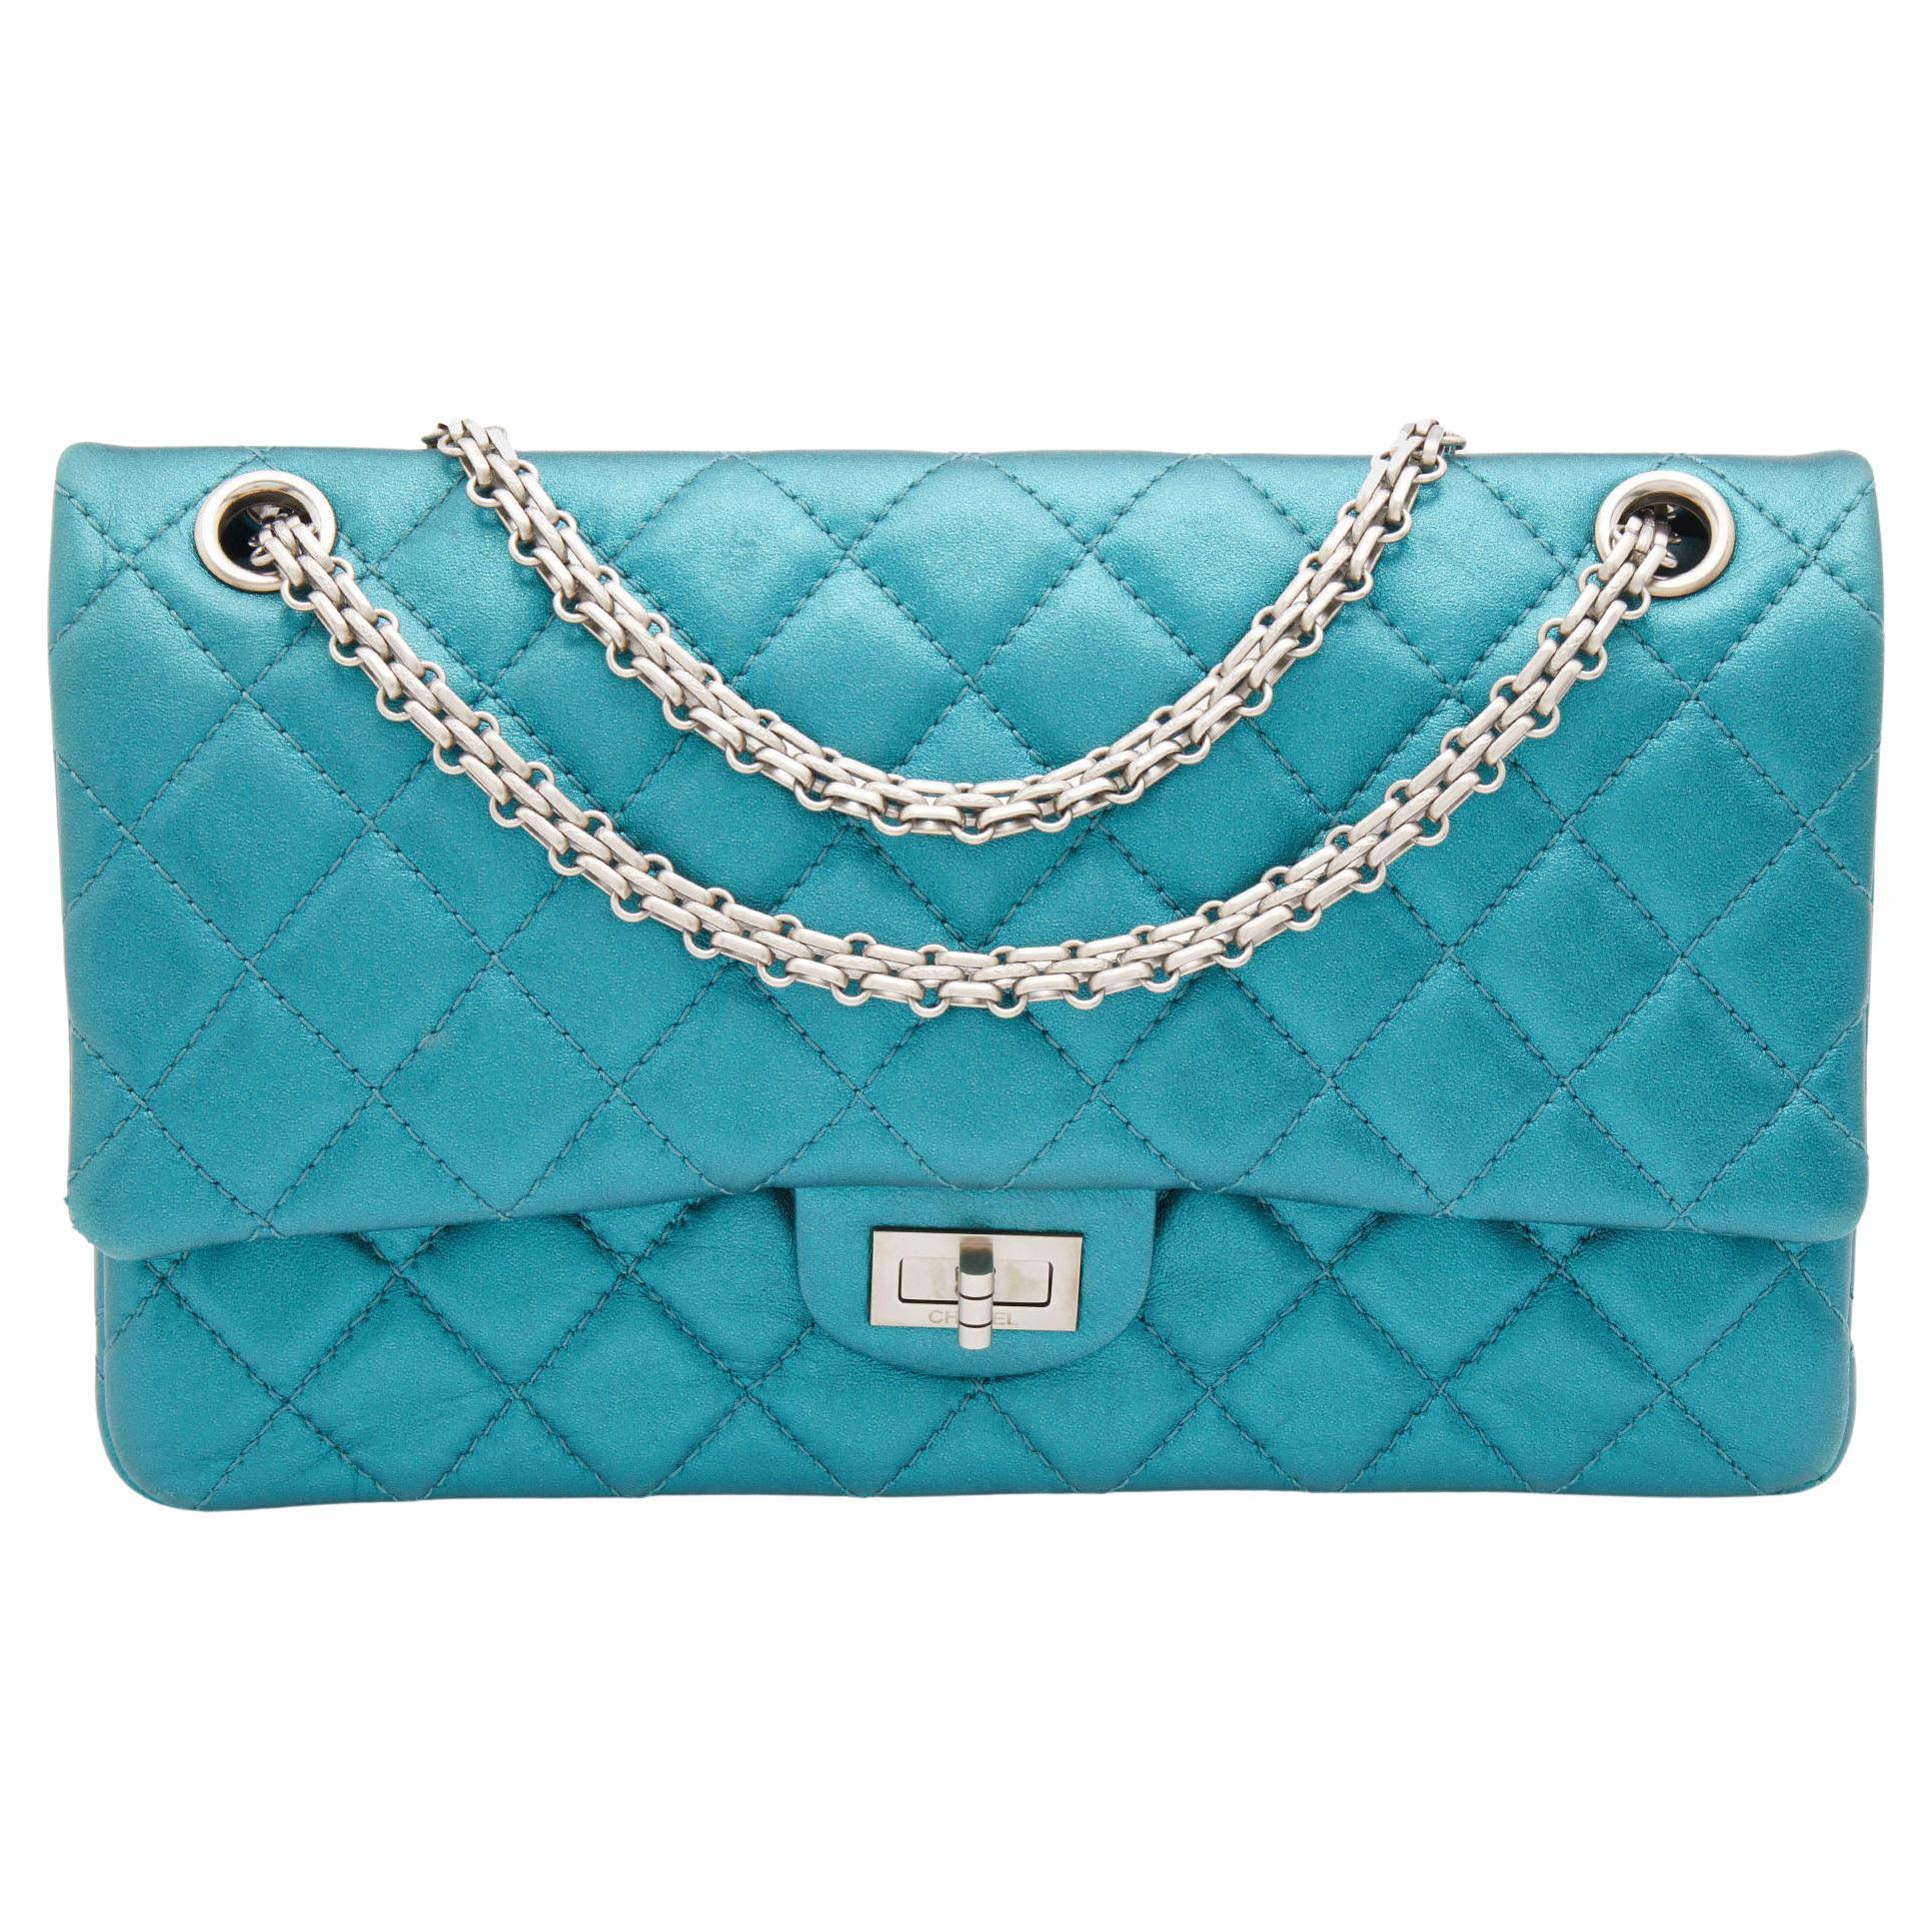 Chanel Metallic Teal Blue Quilted Leather Reissue 2.55 Classic 226 Flap Bag